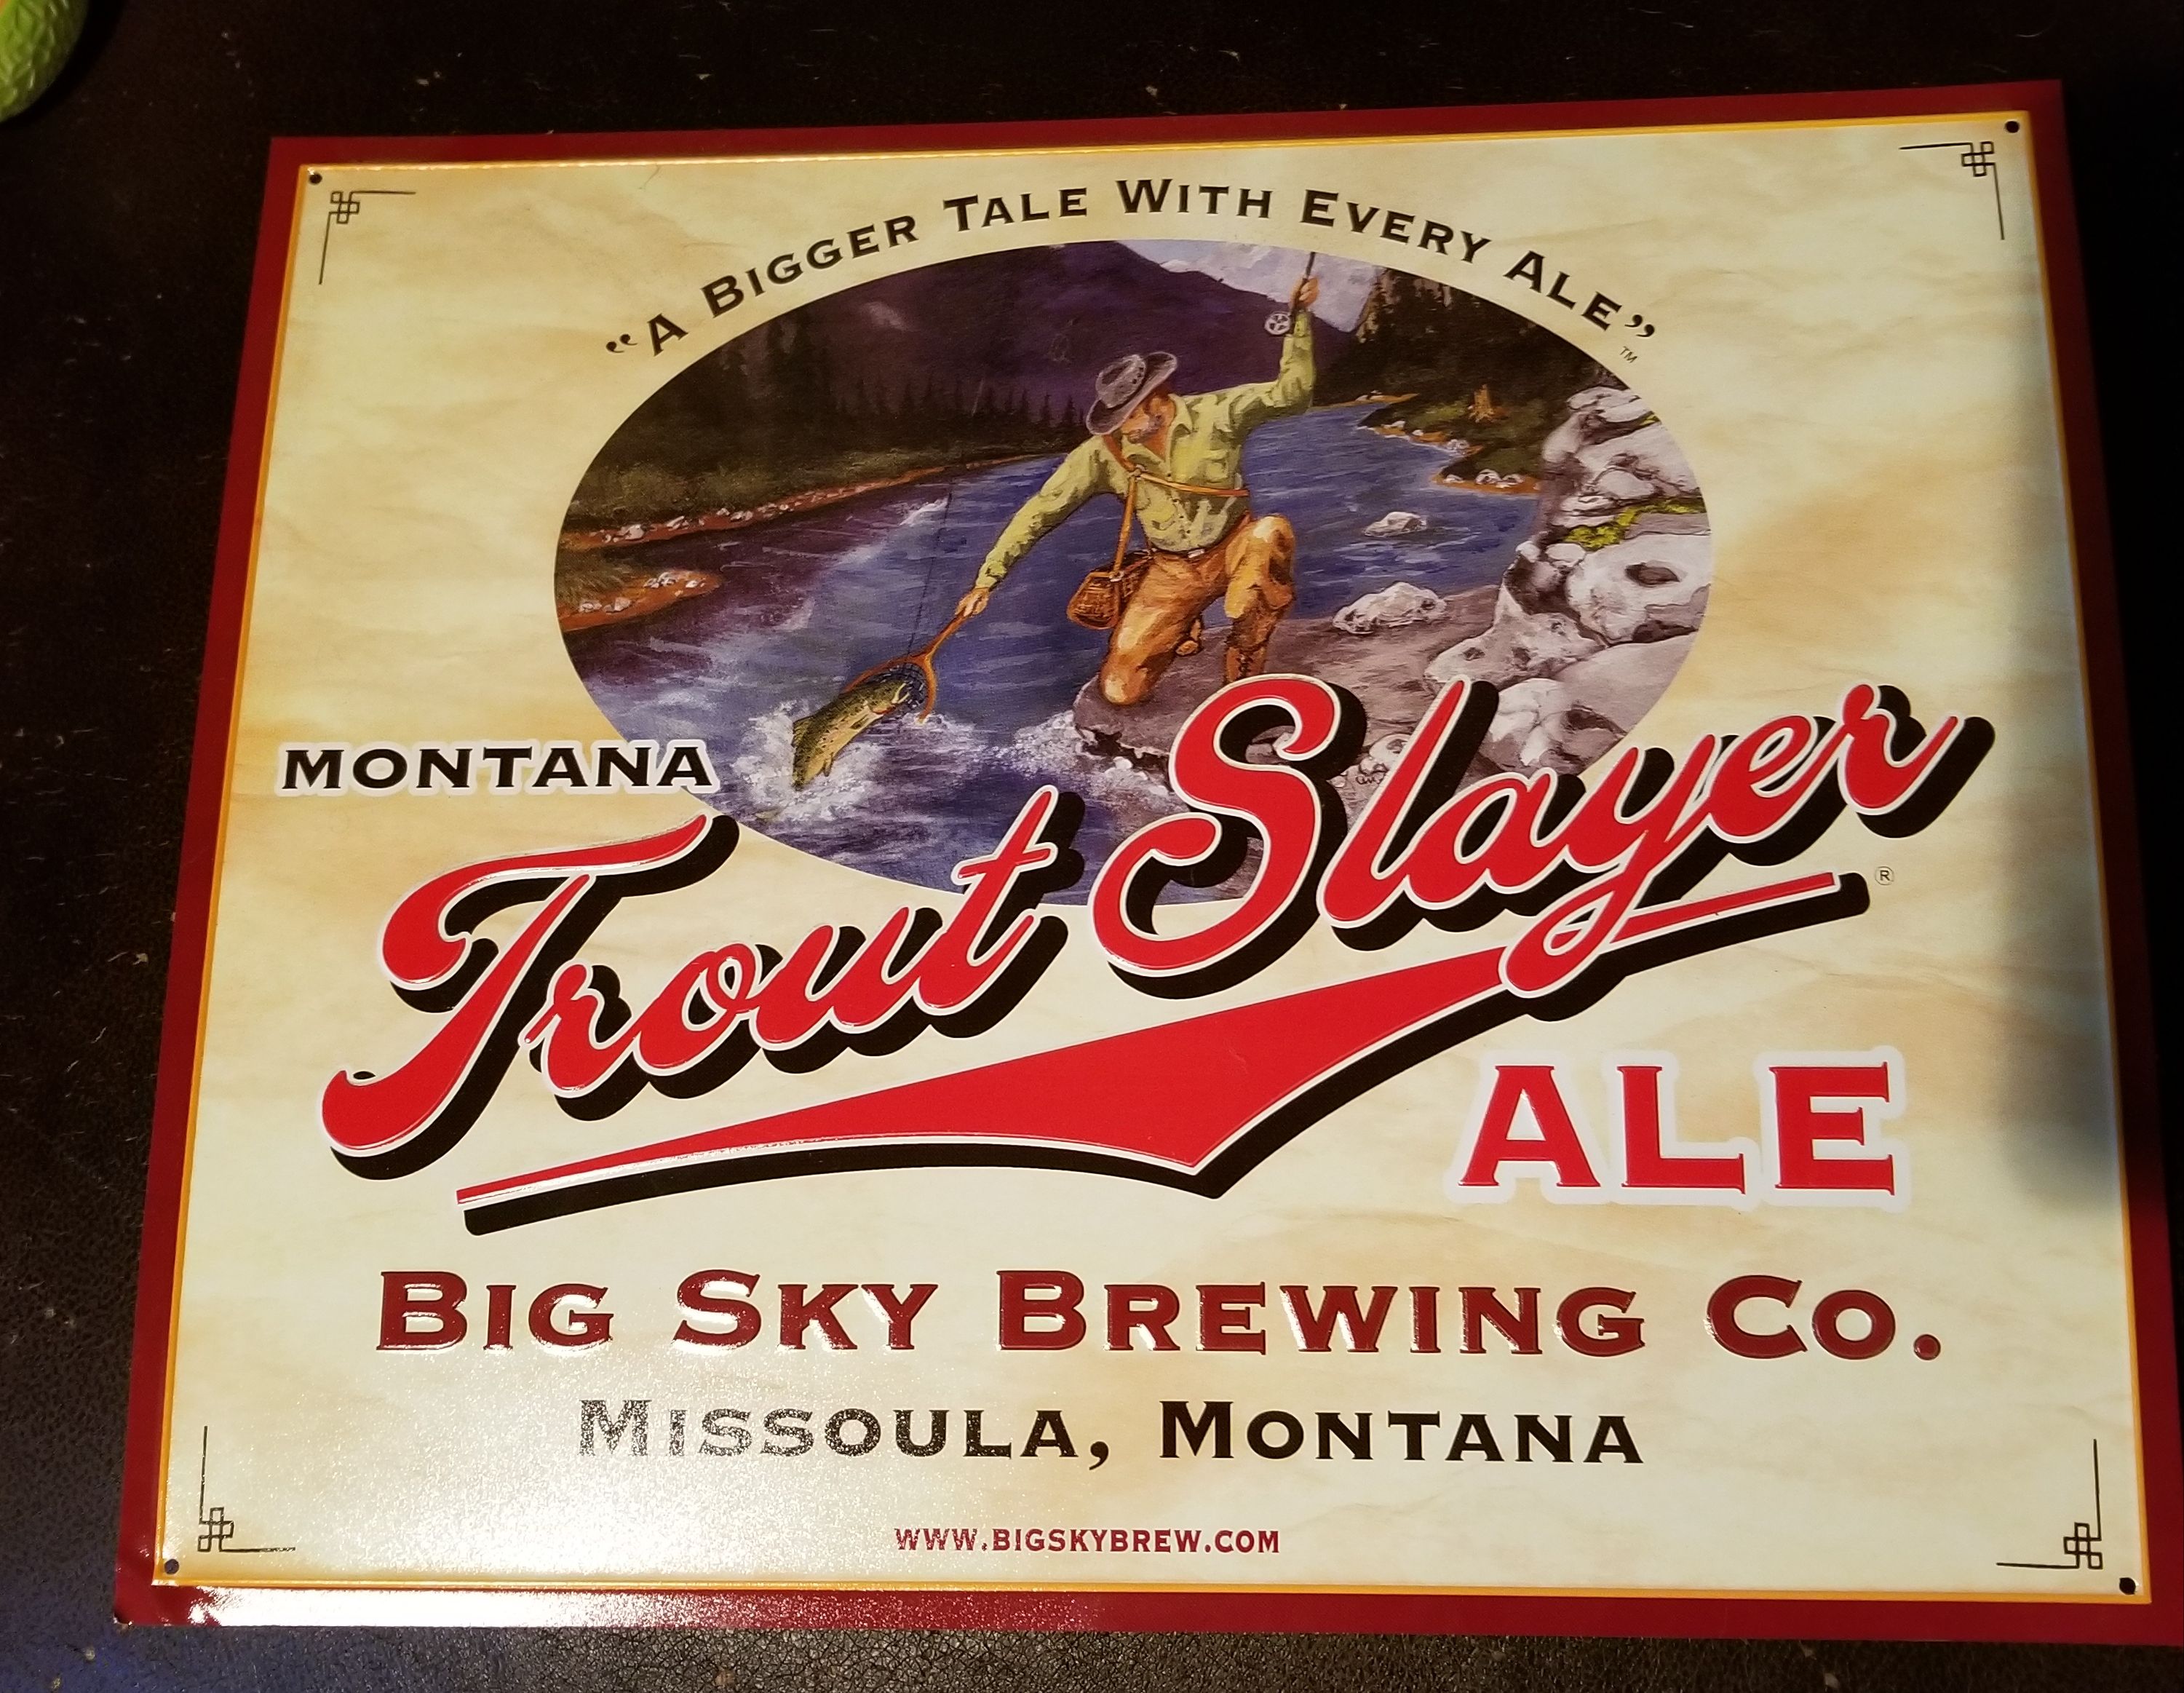 Image of Trout Slayer by Big Sky Brewing Company